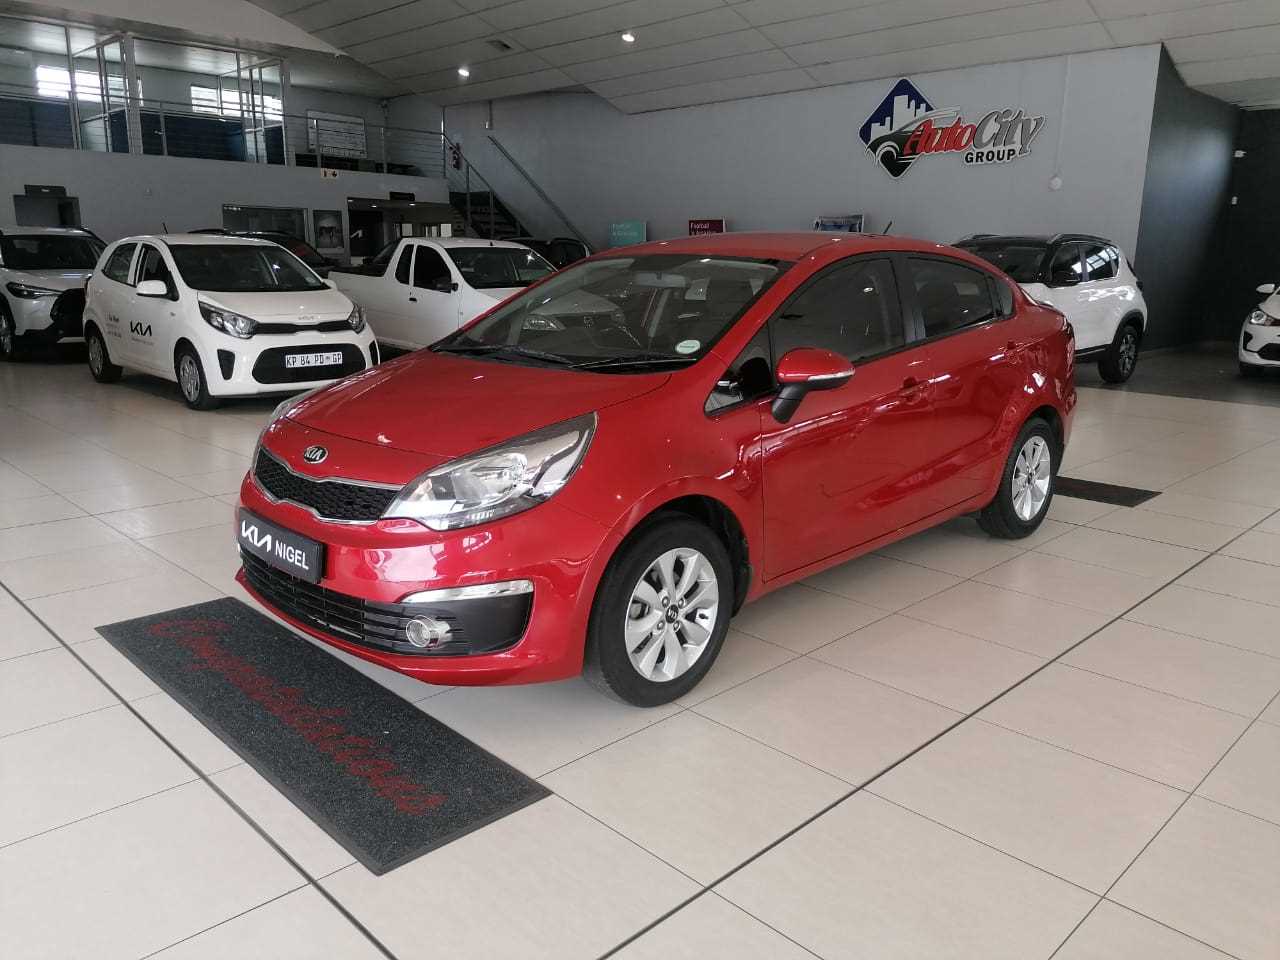 KIA 1.4 MAN for Sale in South Africa